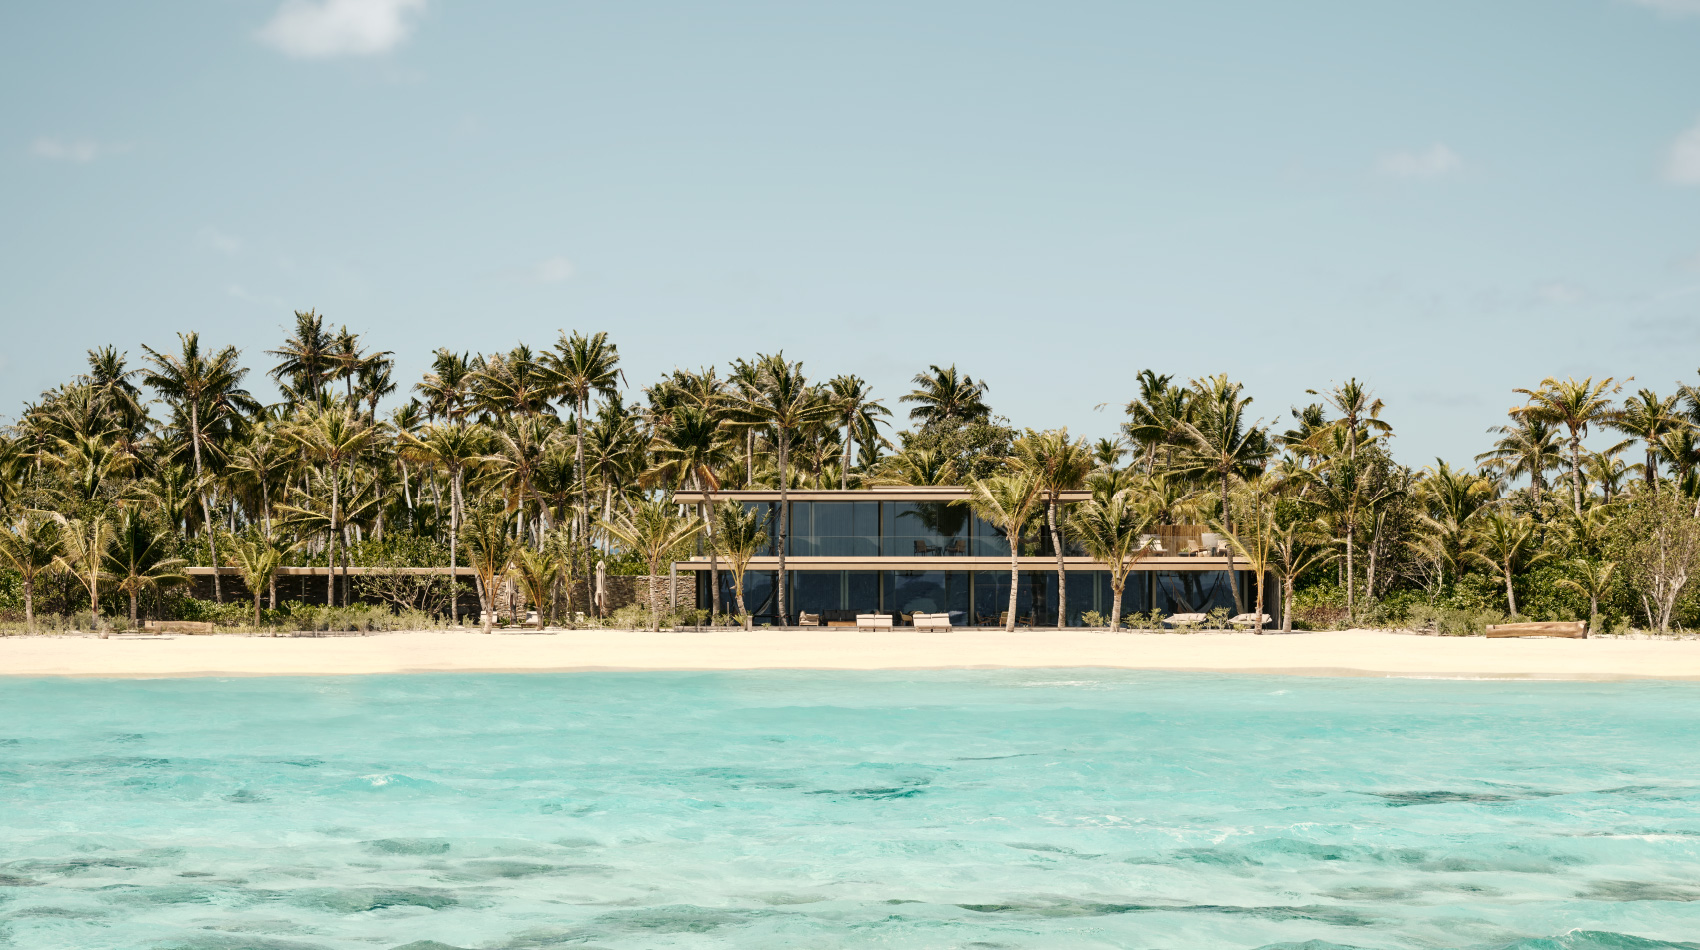 The exterior view of The Beach House at Patina Maldives